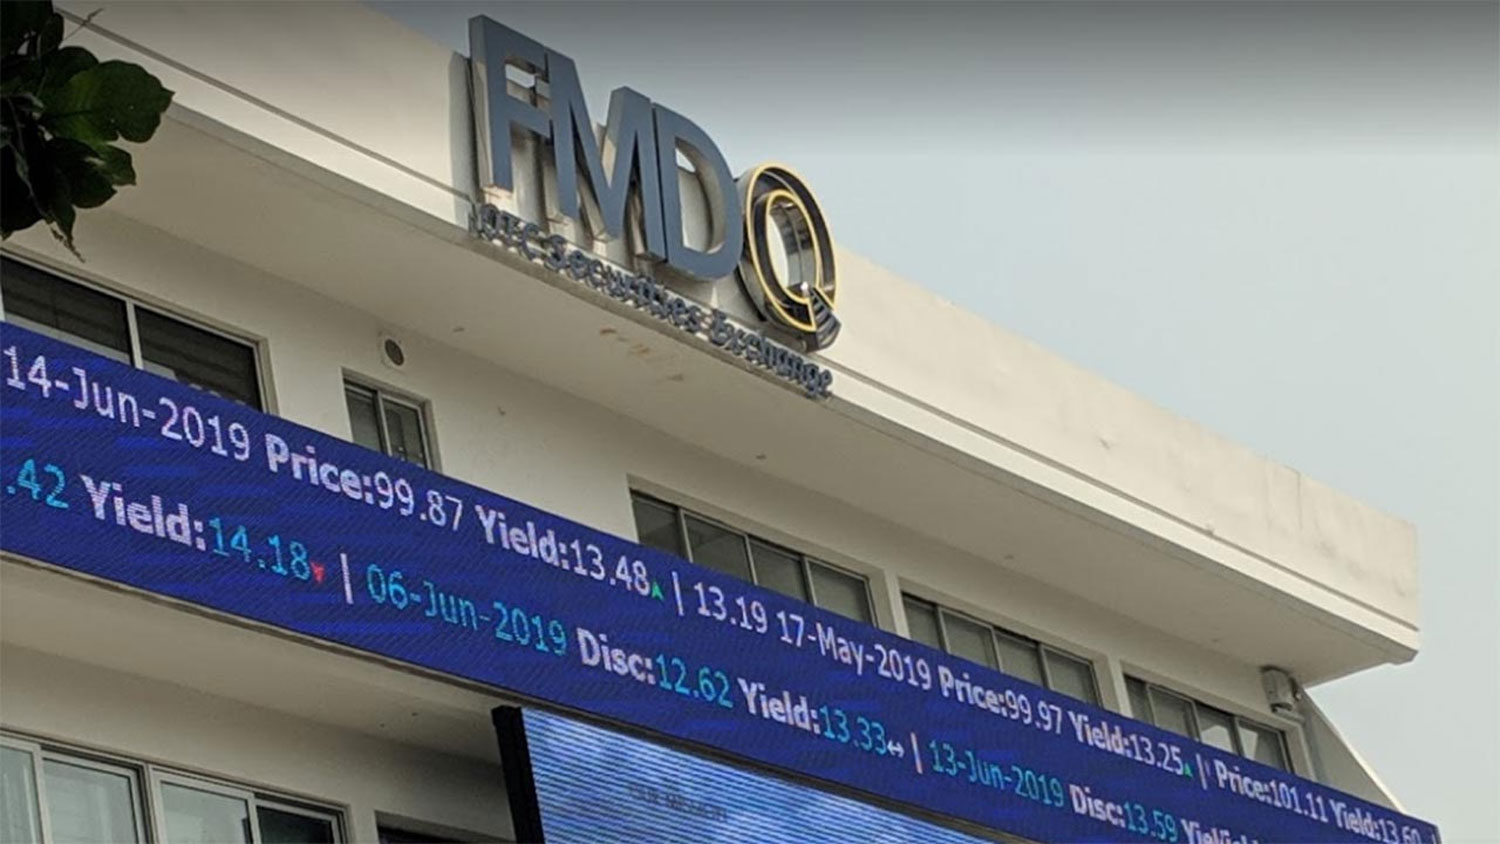 Mixta Real Estate quotes N1.02bn CP on FMDQ